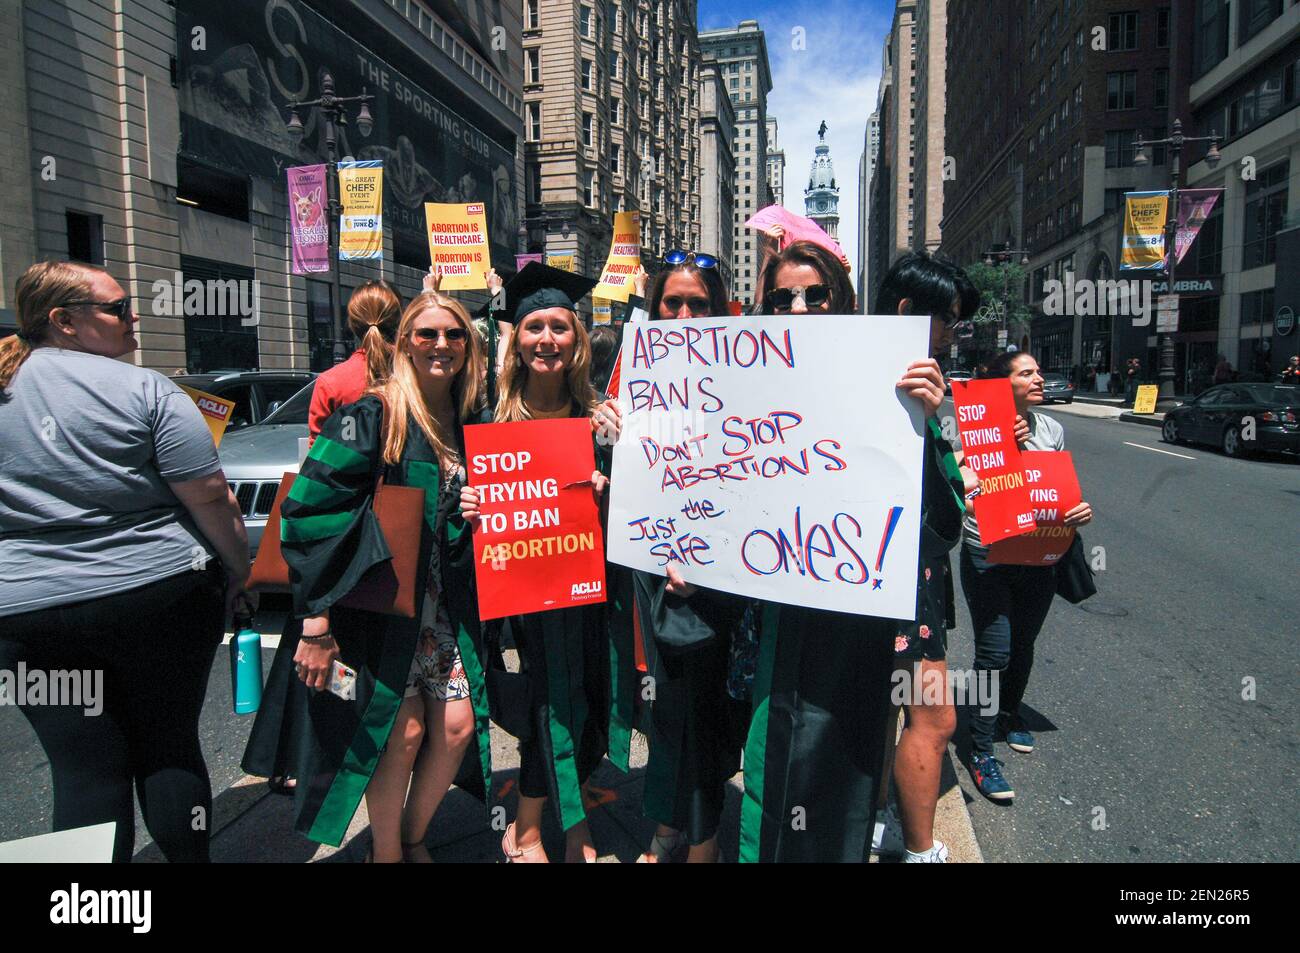 Pro-Choice Activist riase the point that bans on abortion do prevent abortions but make them more dangerous driving women in need into the shadows reducing access to safe clinical practices during a 'Stop Abortion Bans' rally held during the lunch our in Center city Philadelphia on May 21, 2019. (Cory Clark/Sipoa USA) Stock Photo